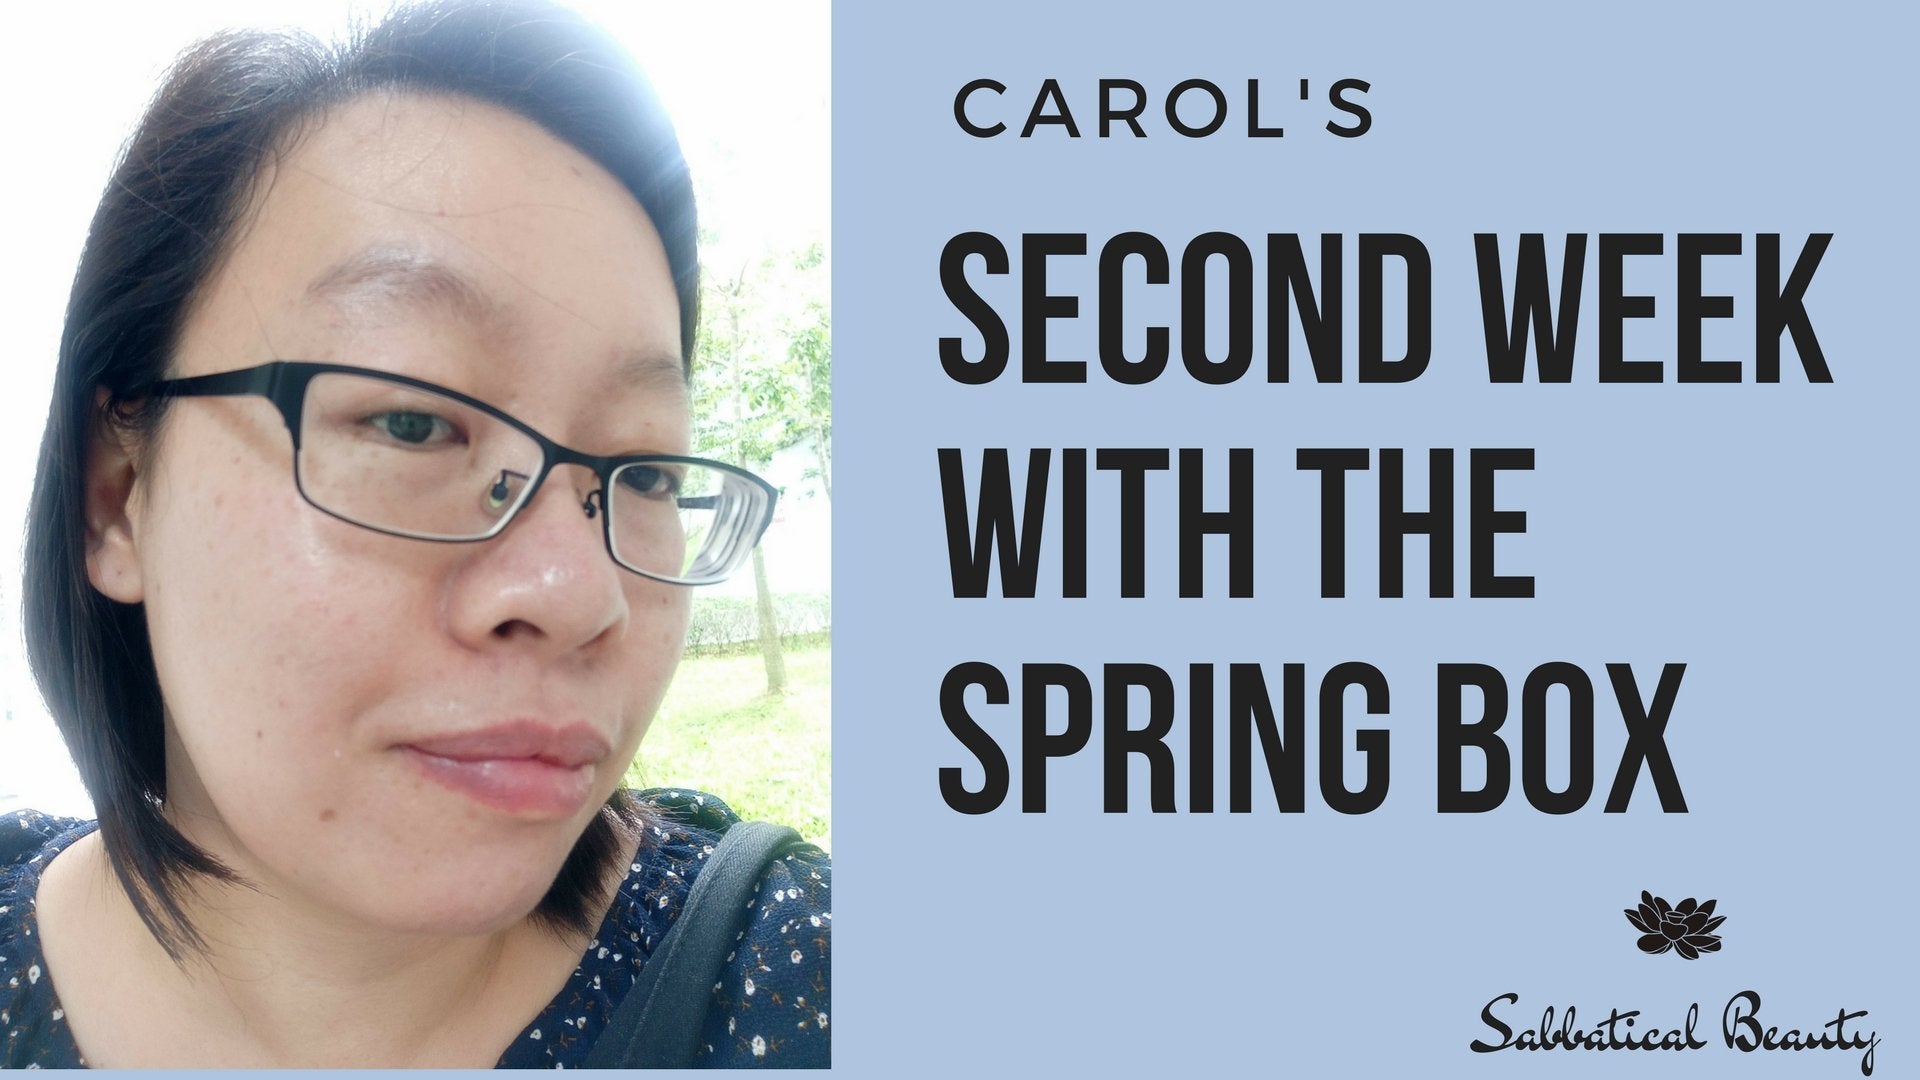 2 Weeks With the Spring Box! - Carol's Review! - Sabbatical Beauty